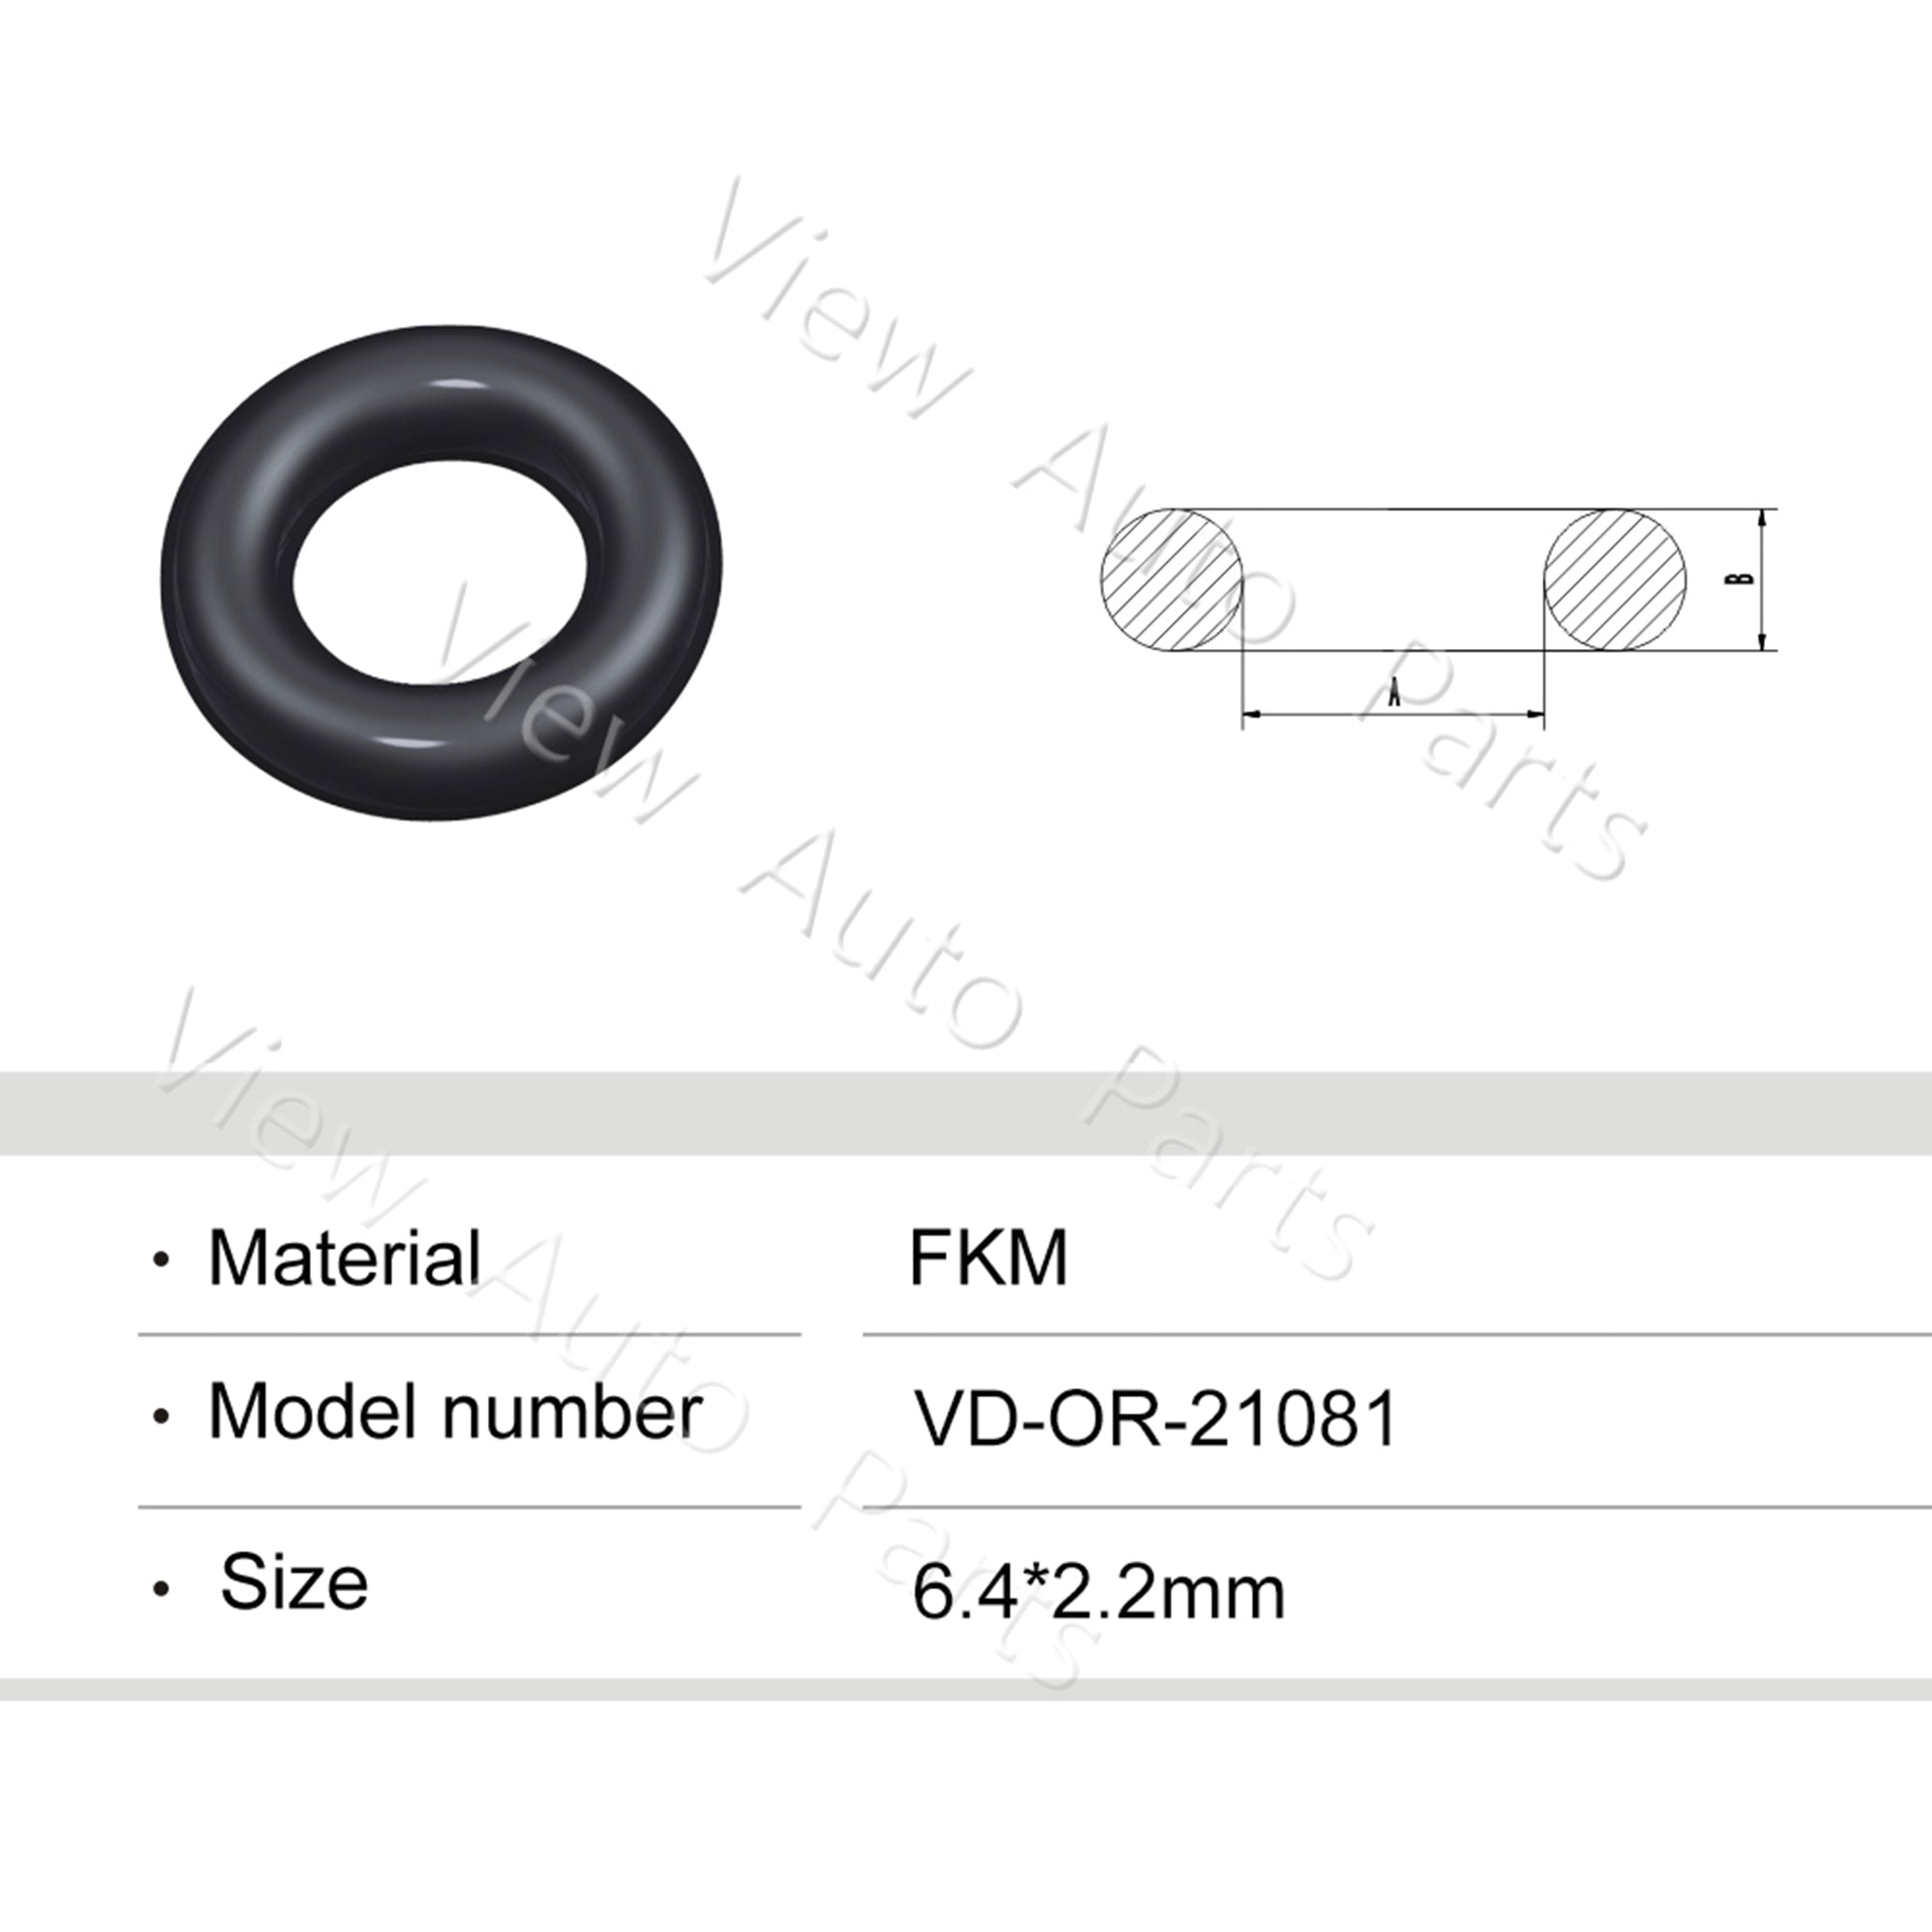 Fuel Injector Rubber Seal Orings for Fuel Injector Repair Kits FKM & Rubber Heat Resistant, Size: 6.4*2.2mm OR-21081